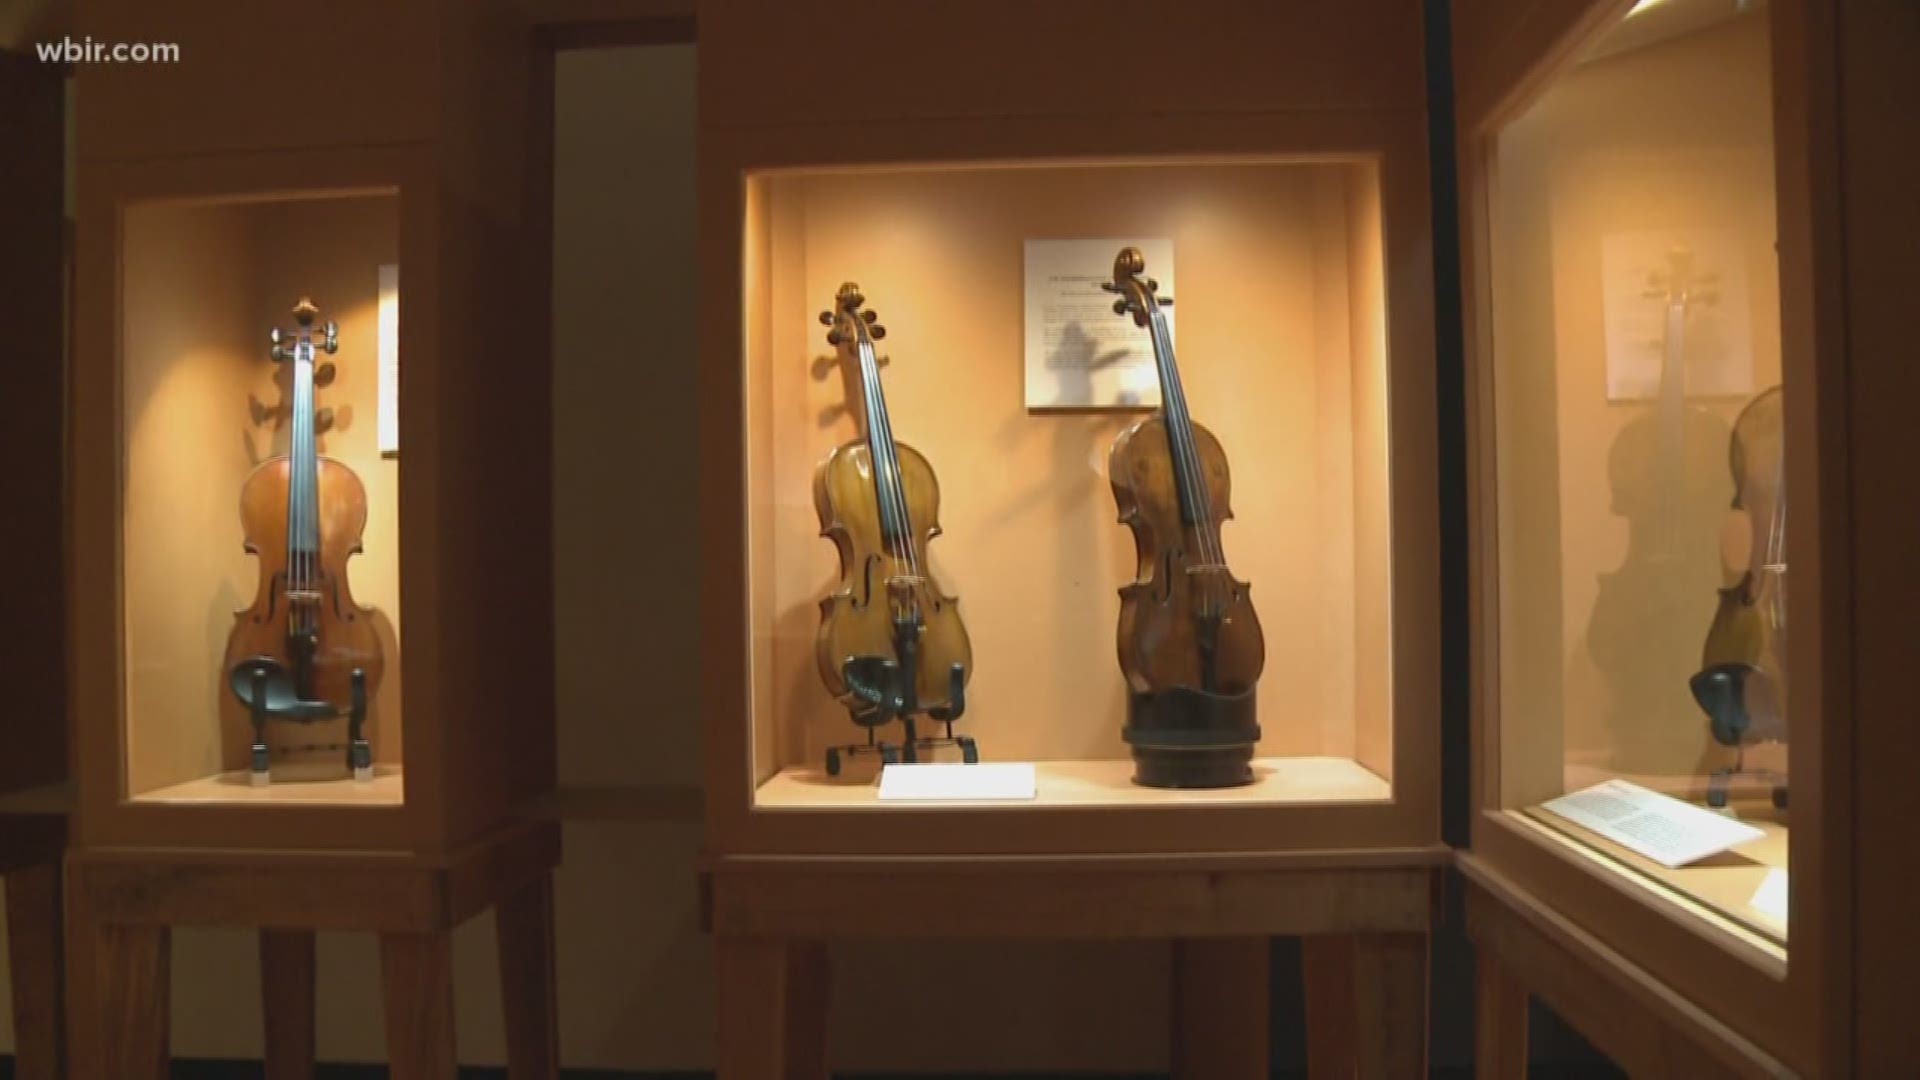 The 'Violins of Hope' exhibit includes over 50 restored violins that were played by Jewish Musicians during the holocaust. They're on exhibit at the University of Tennessee Downtown Gallery on Gay St. The Knoxville Symphony Orchestra will be playing with  the violins of hope at the Tennessee Theatre on January 23rd and 24th. Tickets start at $40. Jan 4, 2018-4pm